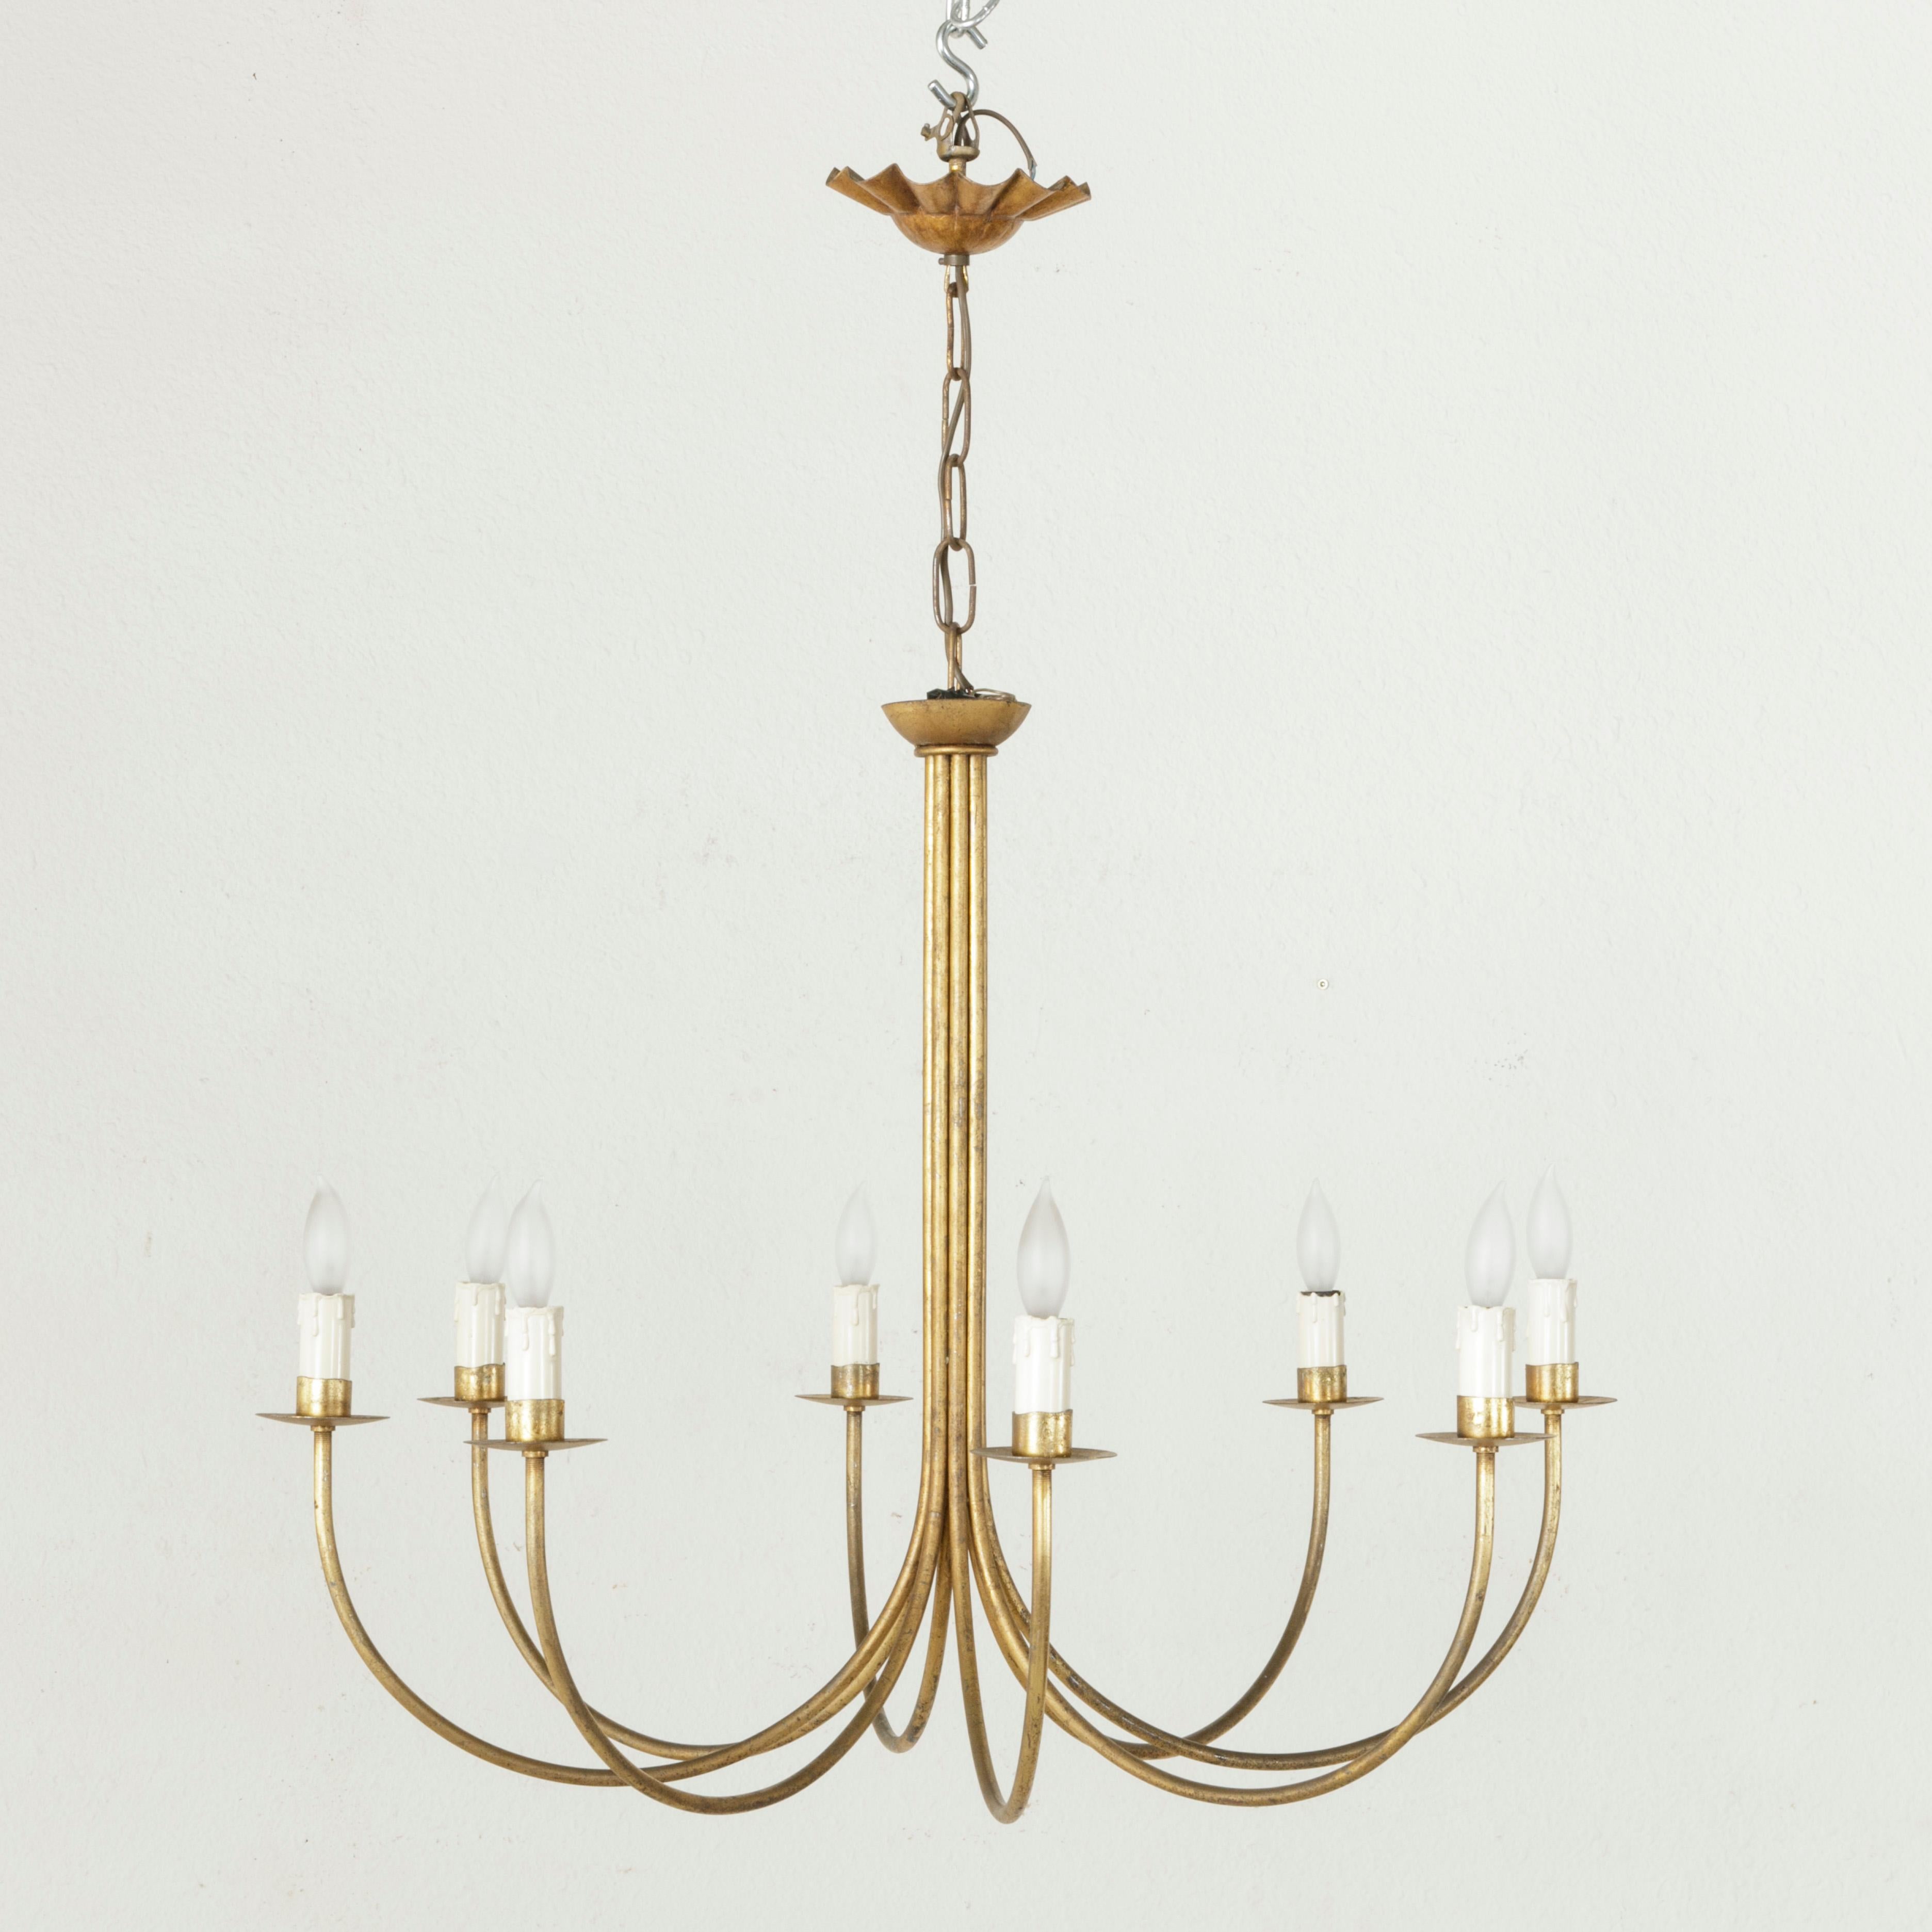 This large midcentury French gilt metal chandelier features a simple design with eight curved arms that join together to form a central pillar. Each arm curves up and supports a bobeche and single light. This circa 1960 chandelier is wired to